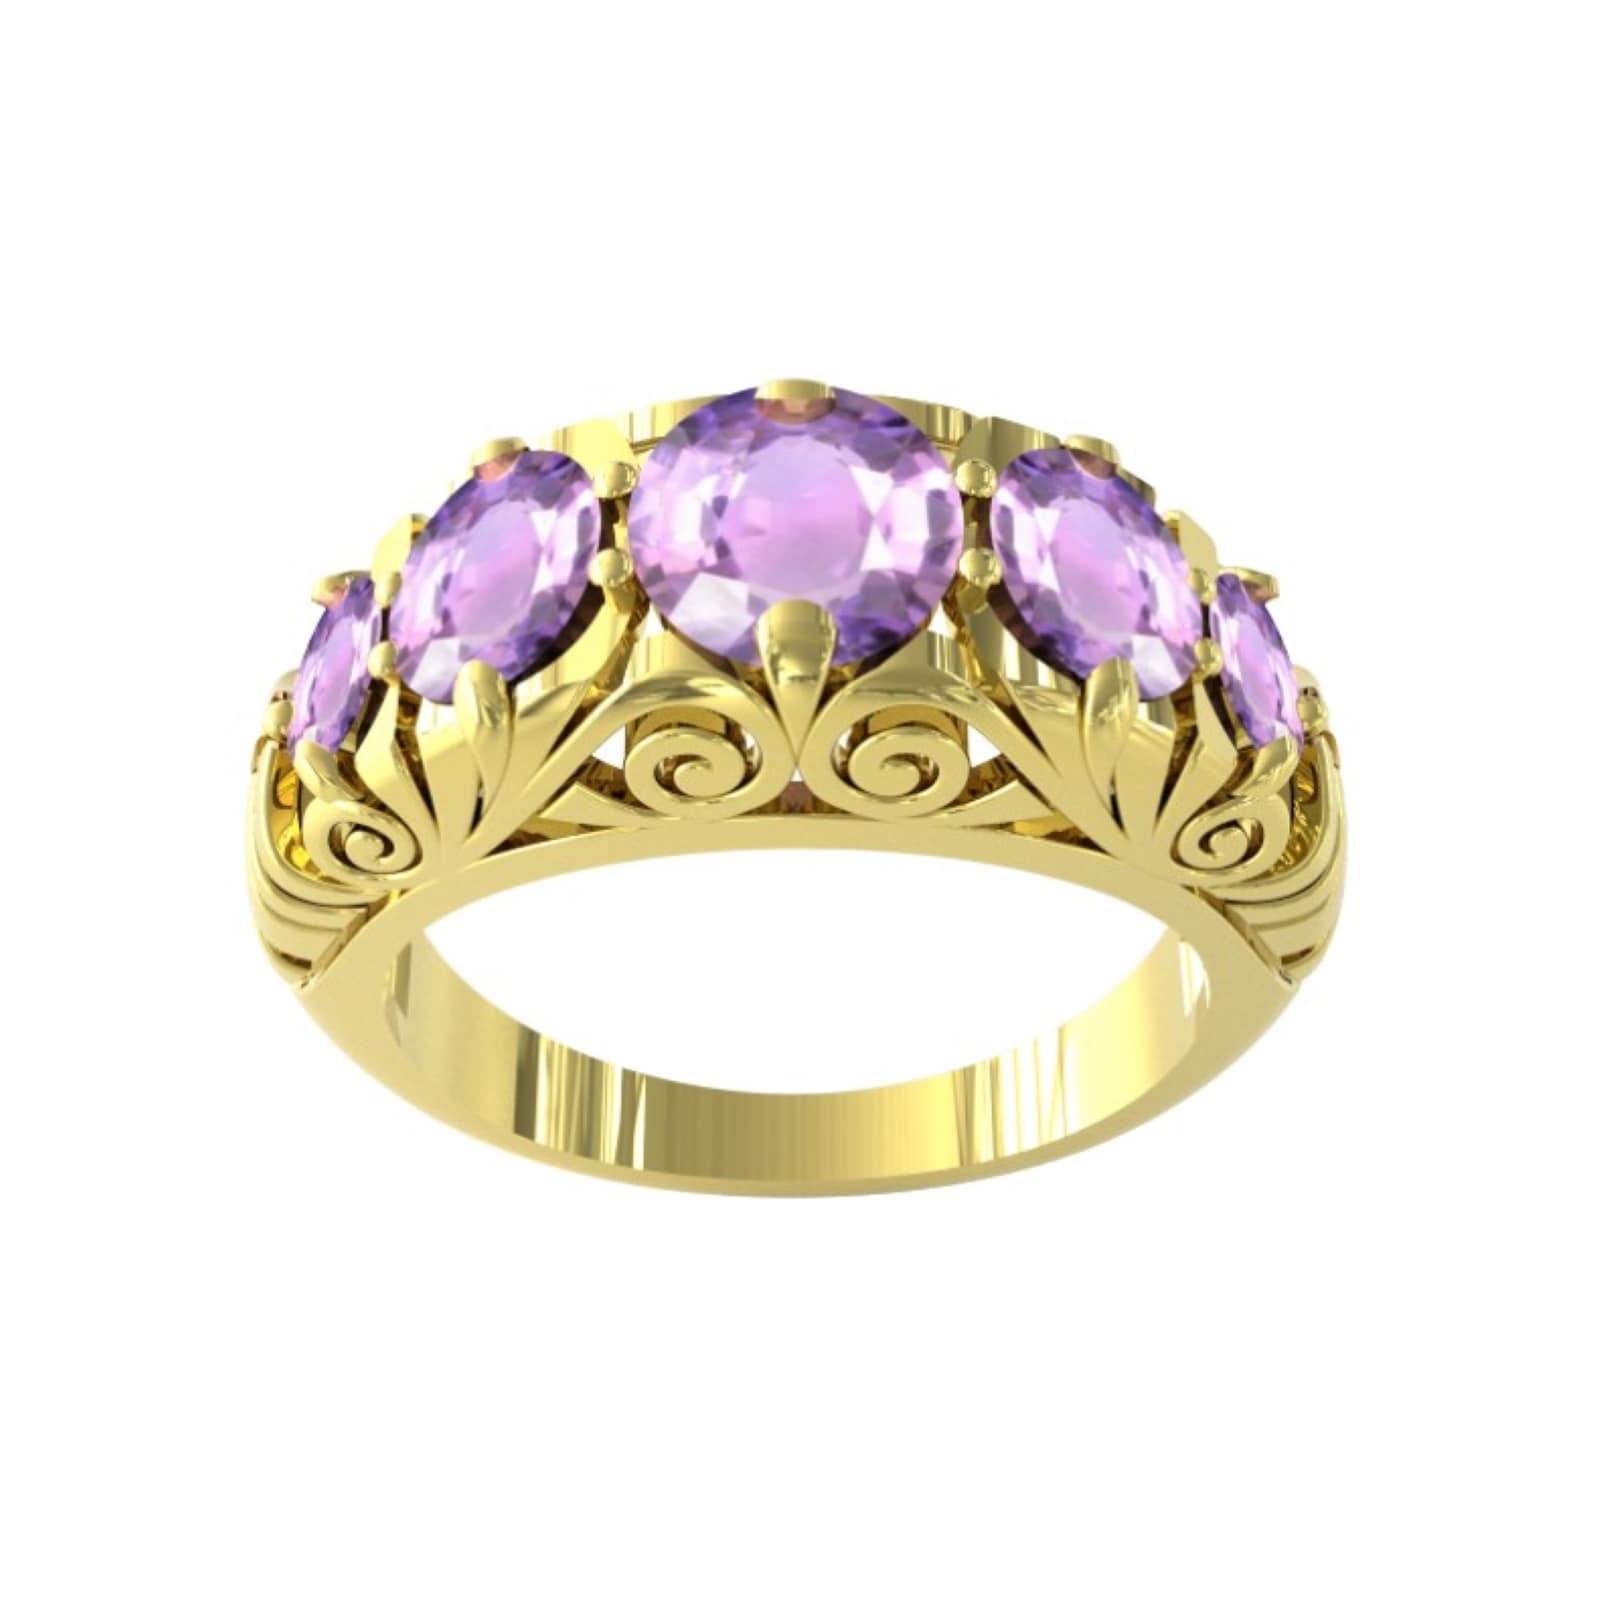 9ct Yellow Gold Victorian Style 5 Stone Amethyst Rings - Ring Size U.5